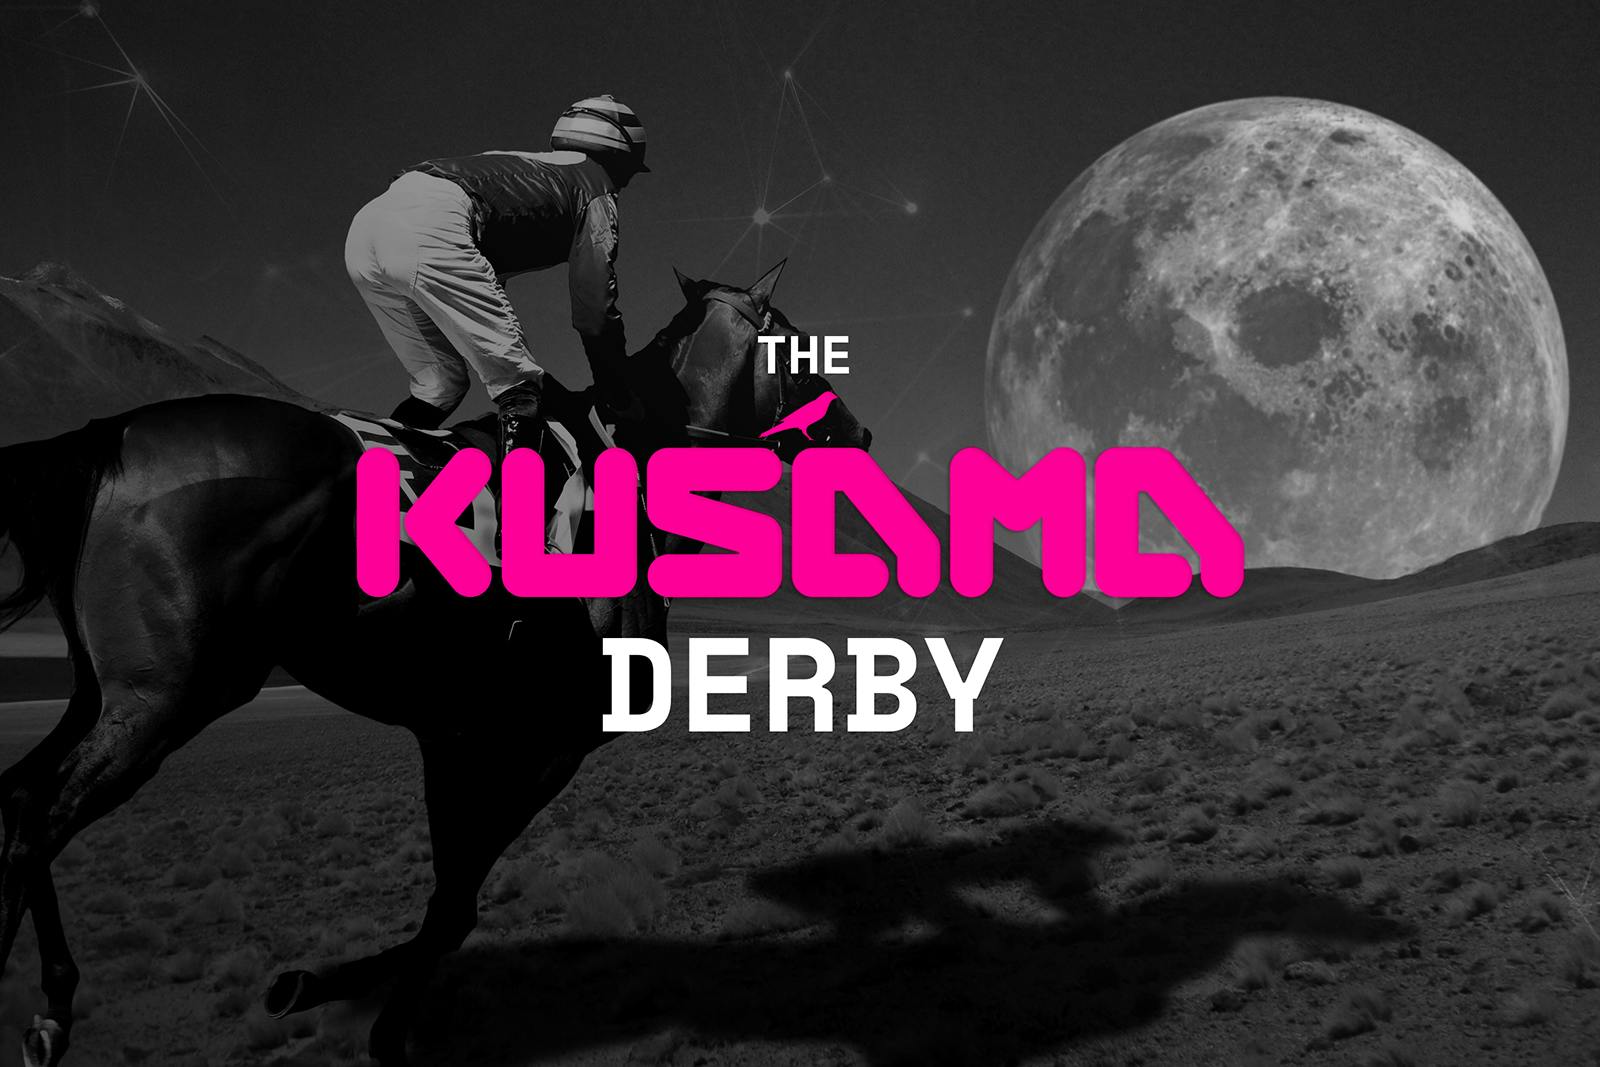 Only 47 Hours Left To Enter The Kusama Derby!